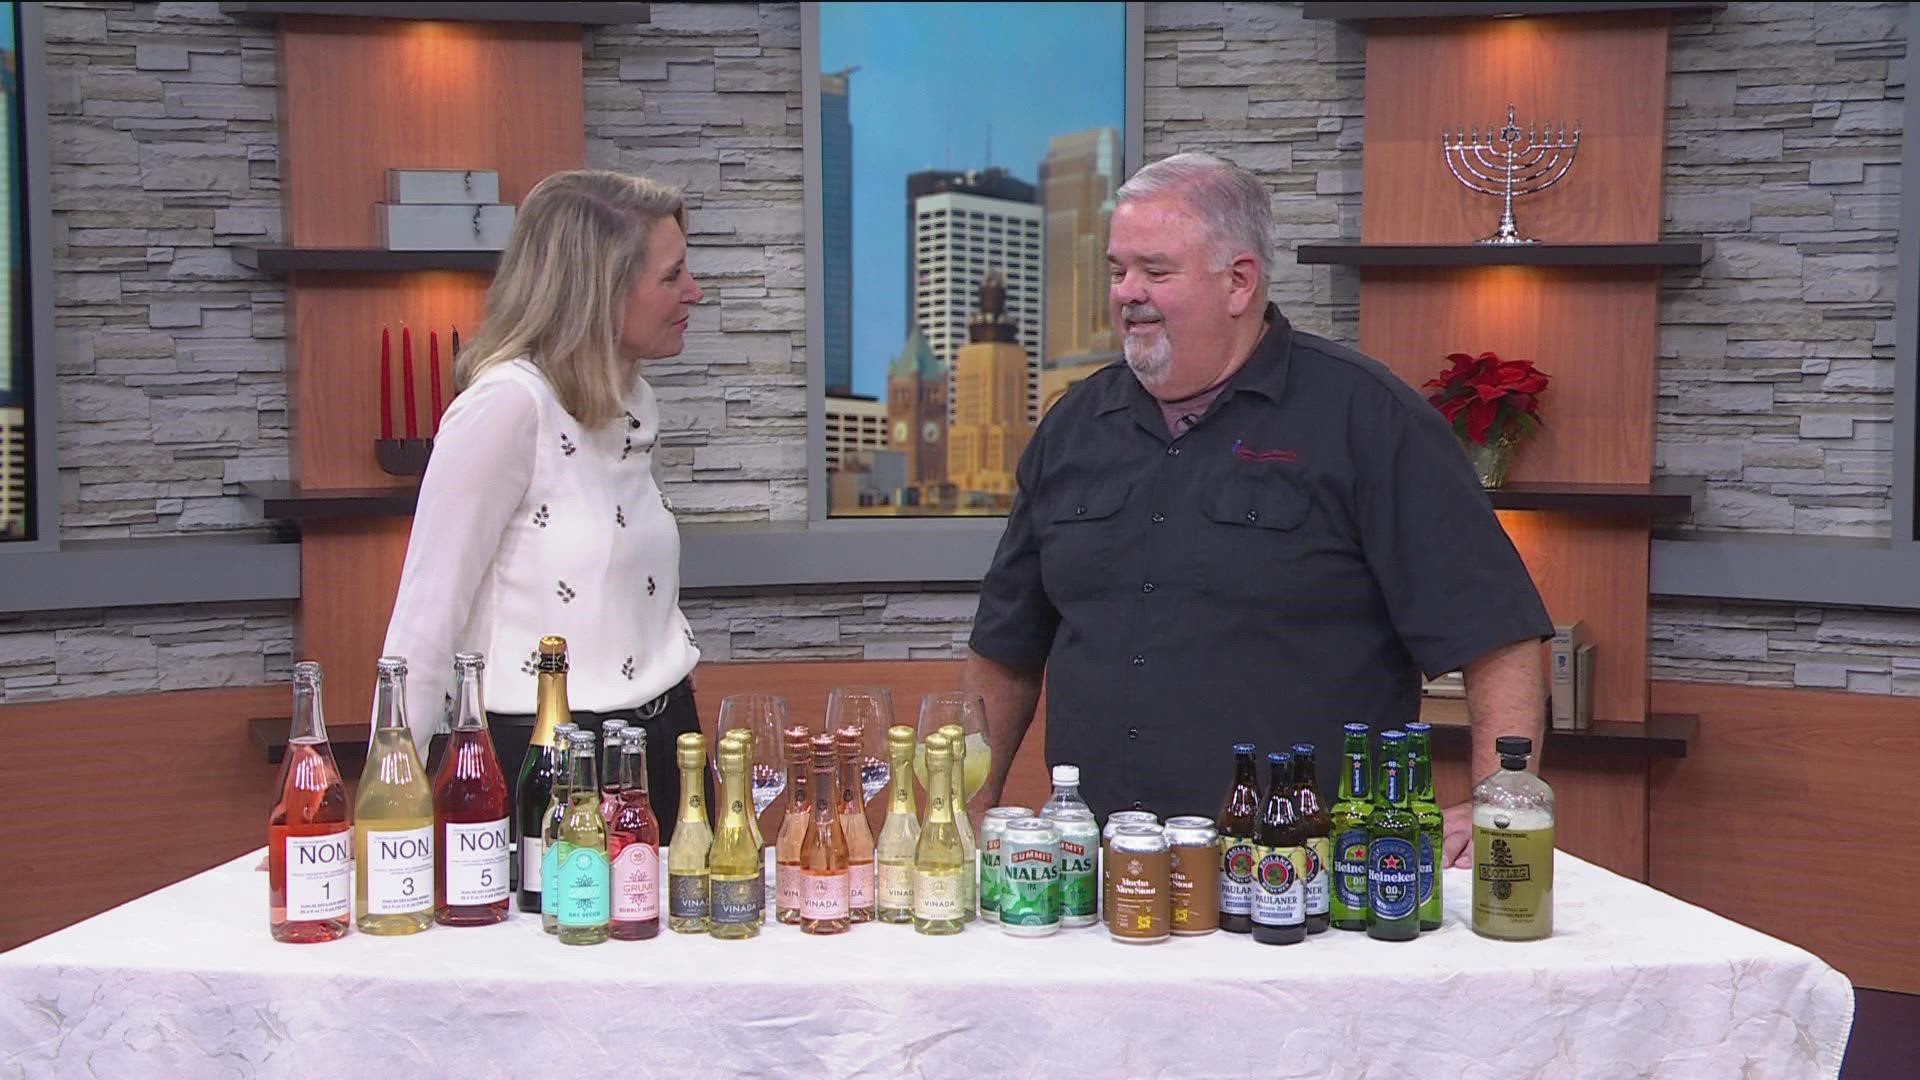 Owner Rodney Brown, founded Cedar Lake Wine Company in 2017 and joined KARE 11 Saturday to show off some new, non-alcoholic drinks.